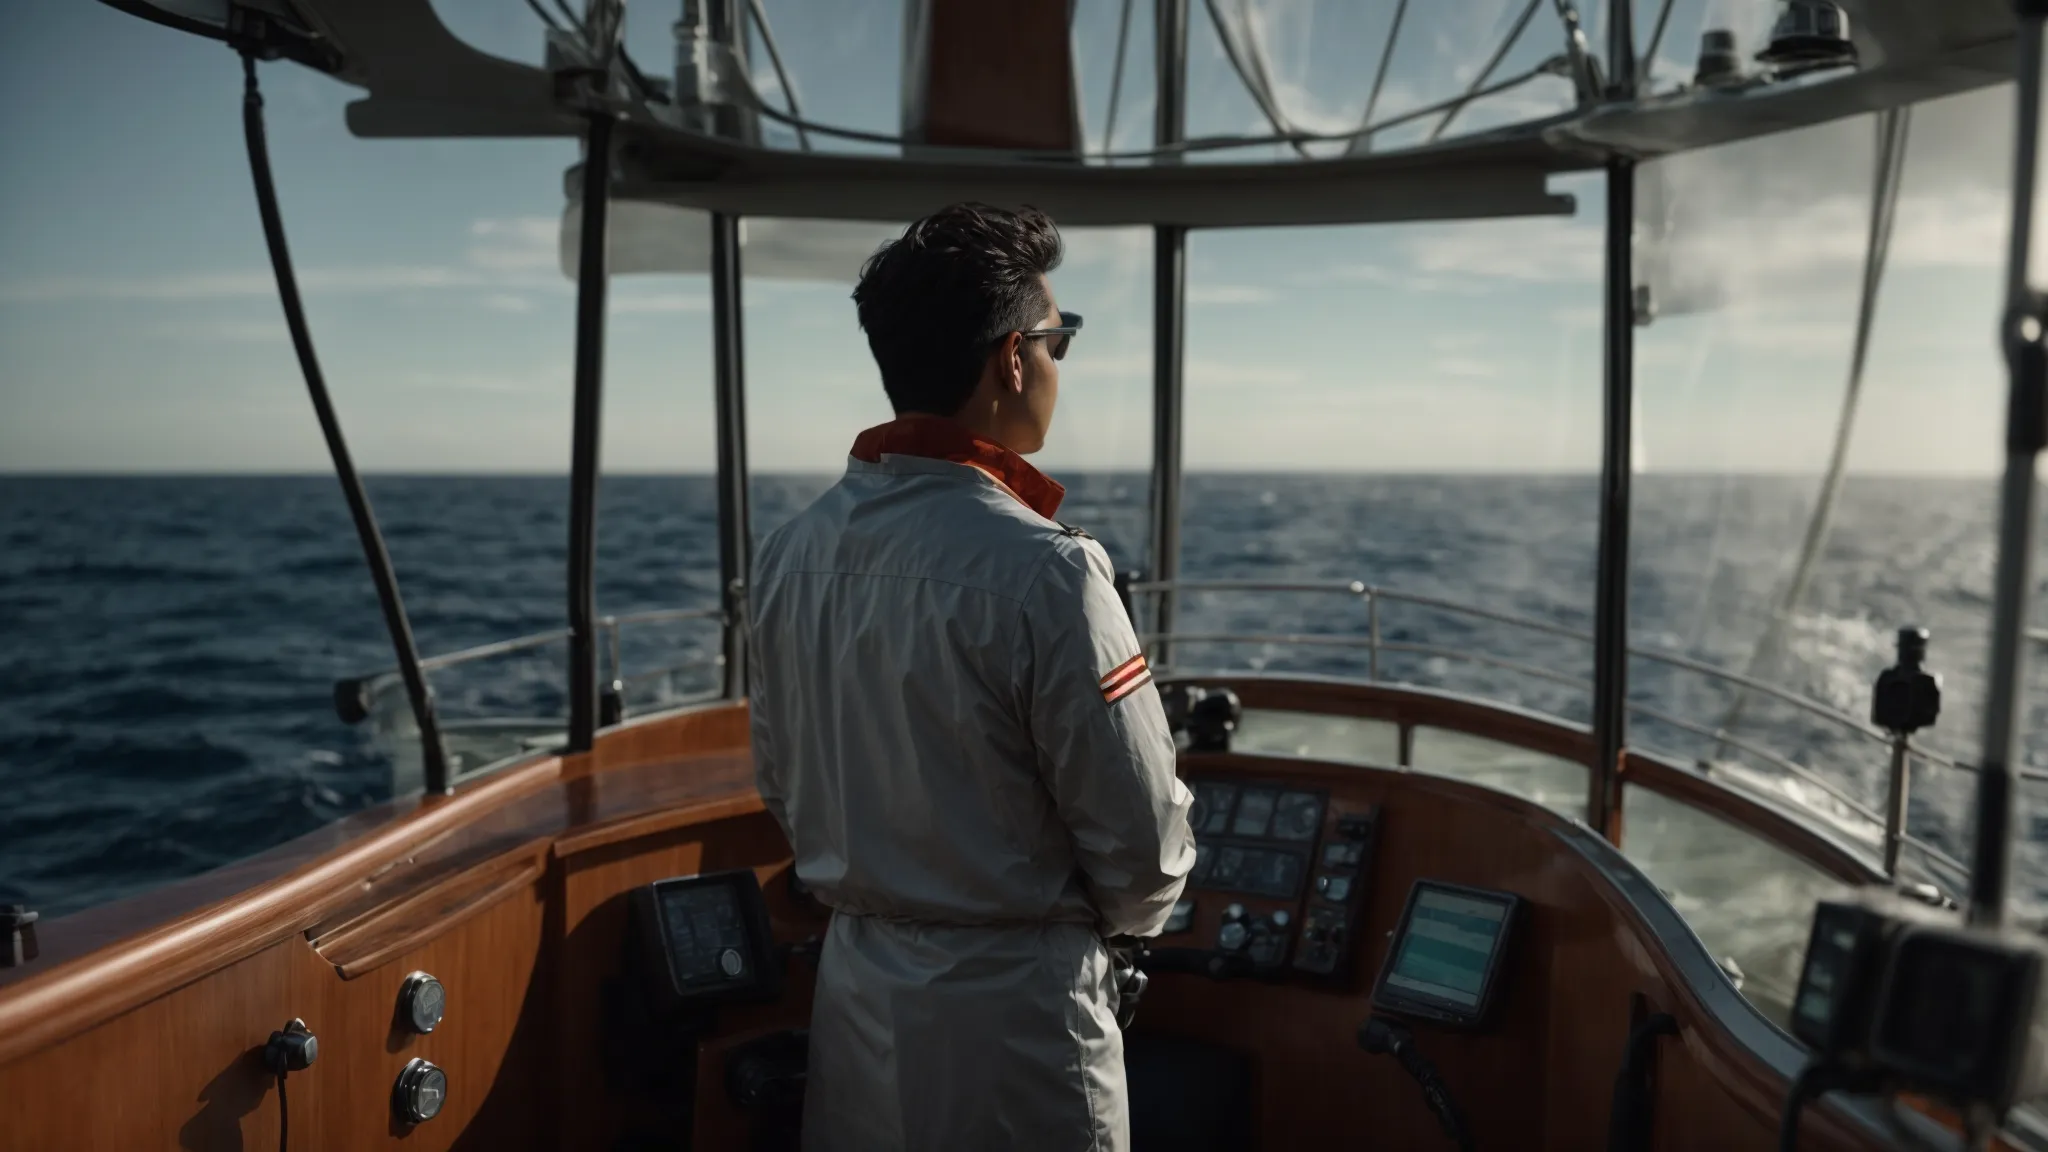 a navigator stands at the helm of a ship, gazing out over a vast ocean that merges seamlessly into a digital landscape representing data and analytics.